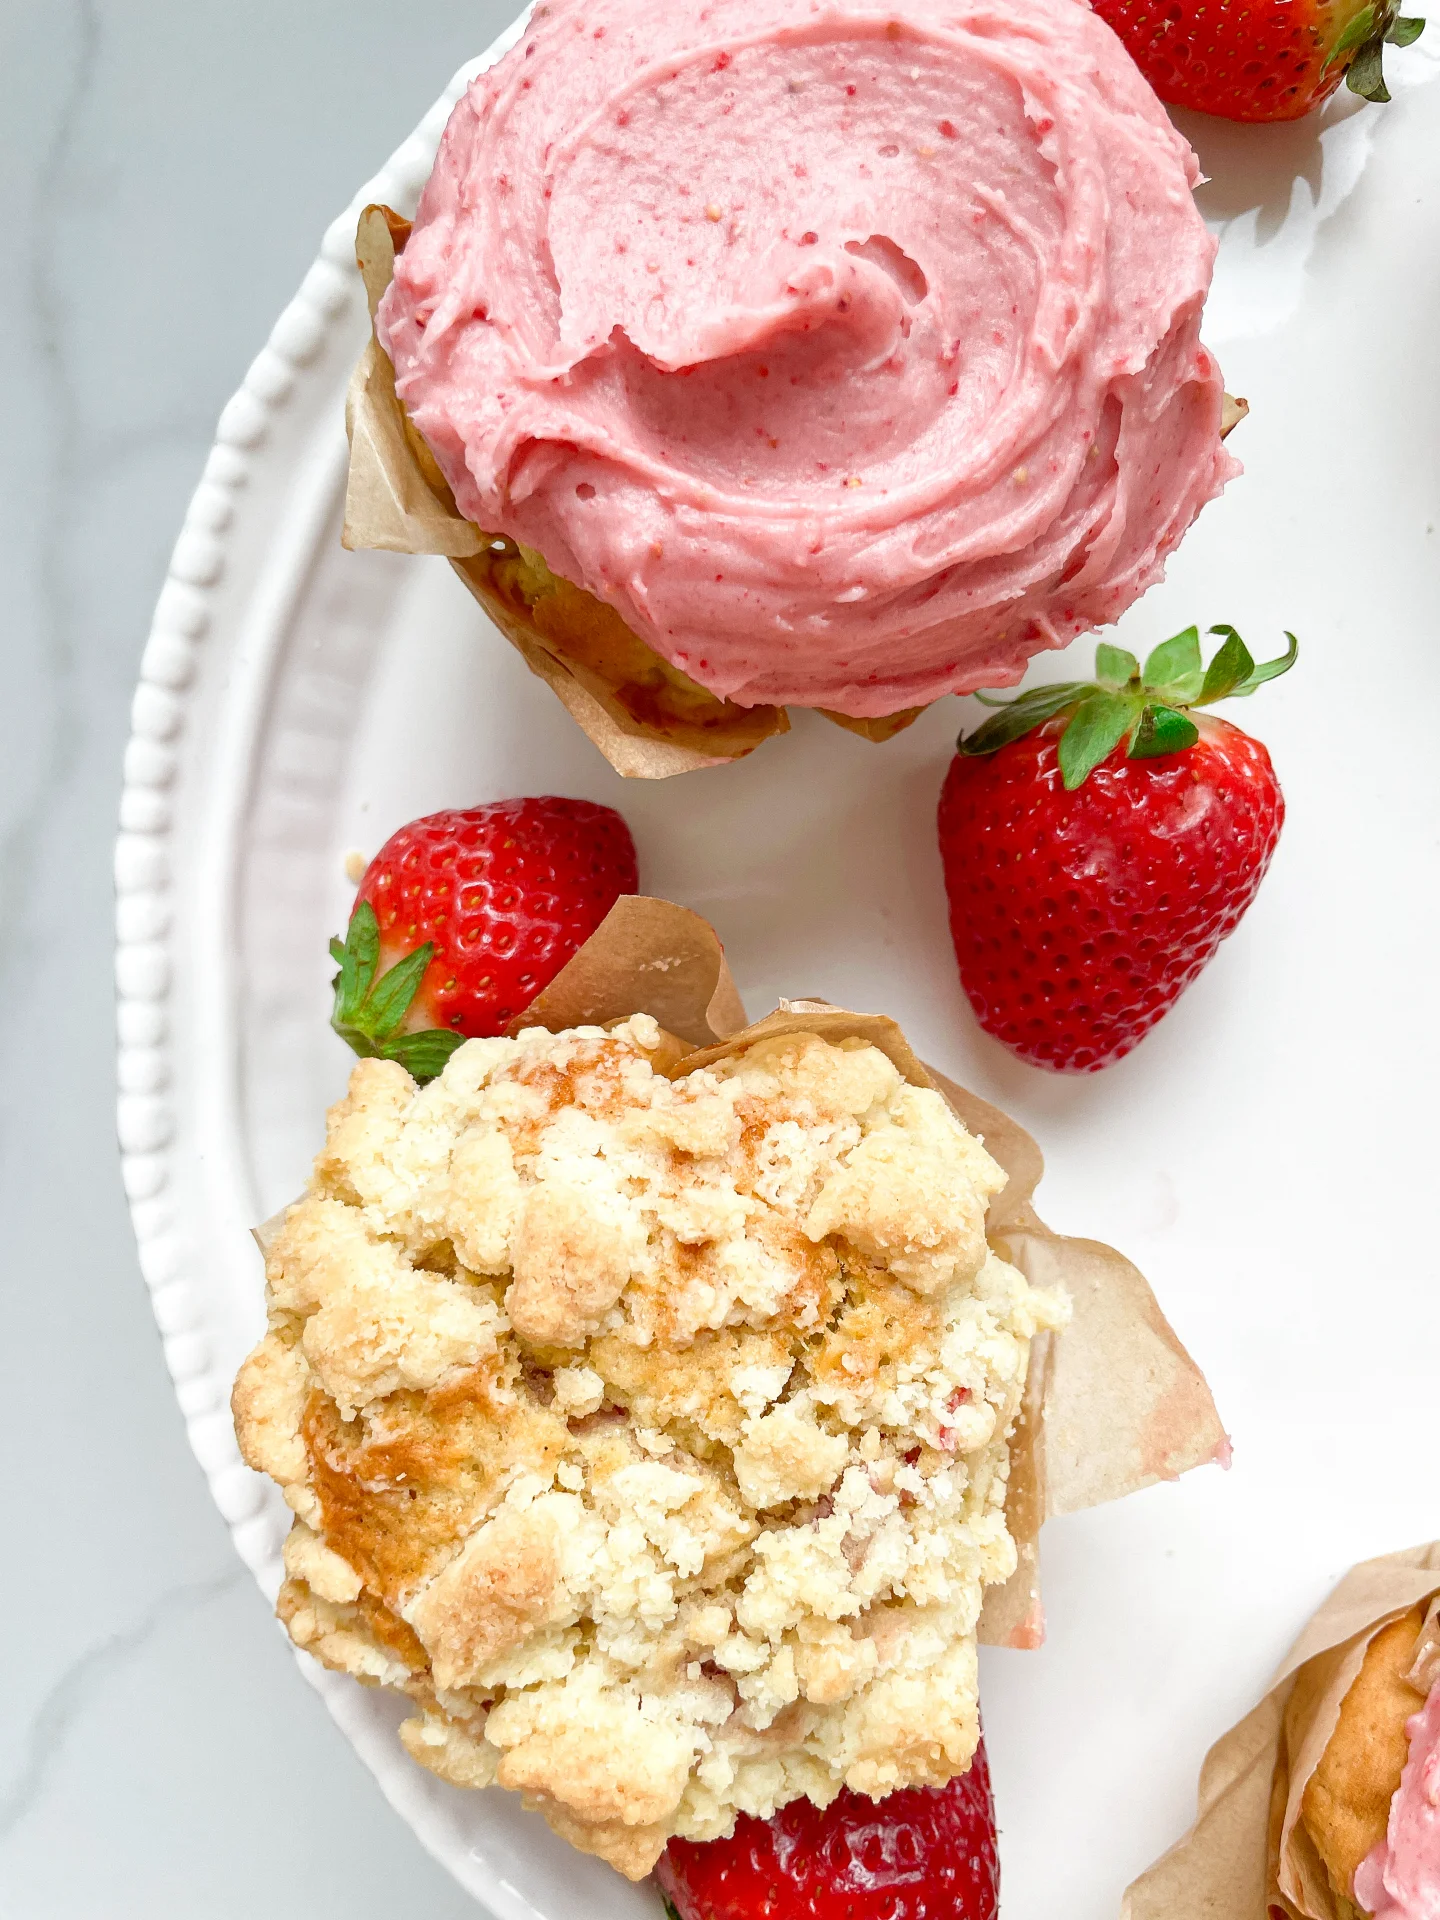 Strawberry Cupcakes with Cream Cheese Frosting & Cheesecake Filling